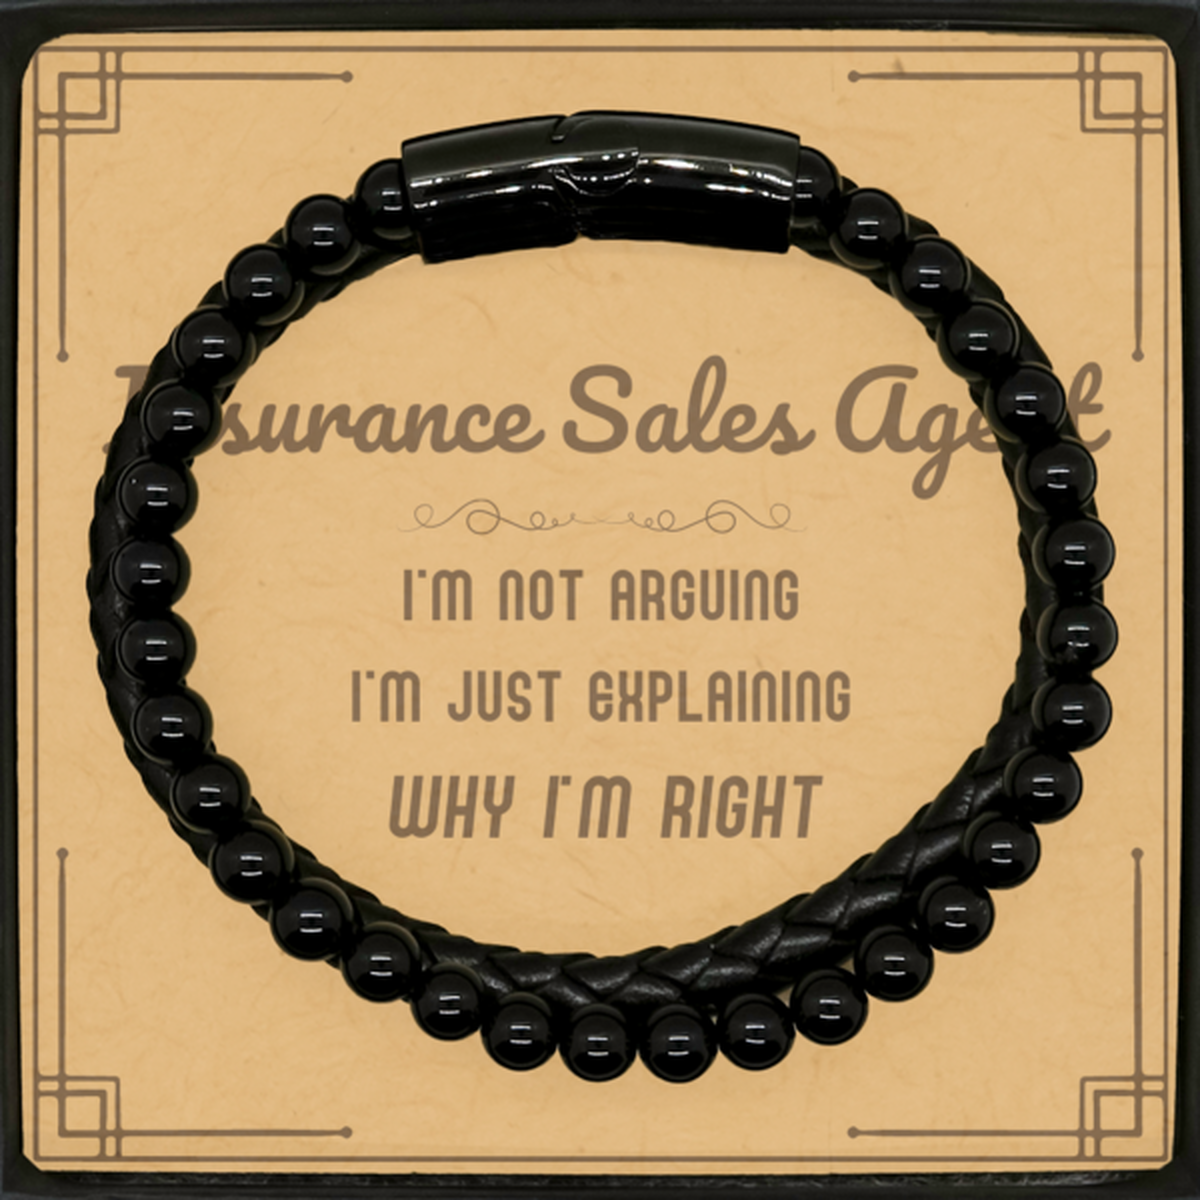 Insurance Sales Agent I'm not Arguing. I'm Just Explaining Why I'm RIGHT Stone Leather Bracelets, Funny Saying Quote Insurance Sales Agent Gifts For Insurance Sales Agent Message Card Graduation Birthday Christmas Gifts for Men Women Coworker